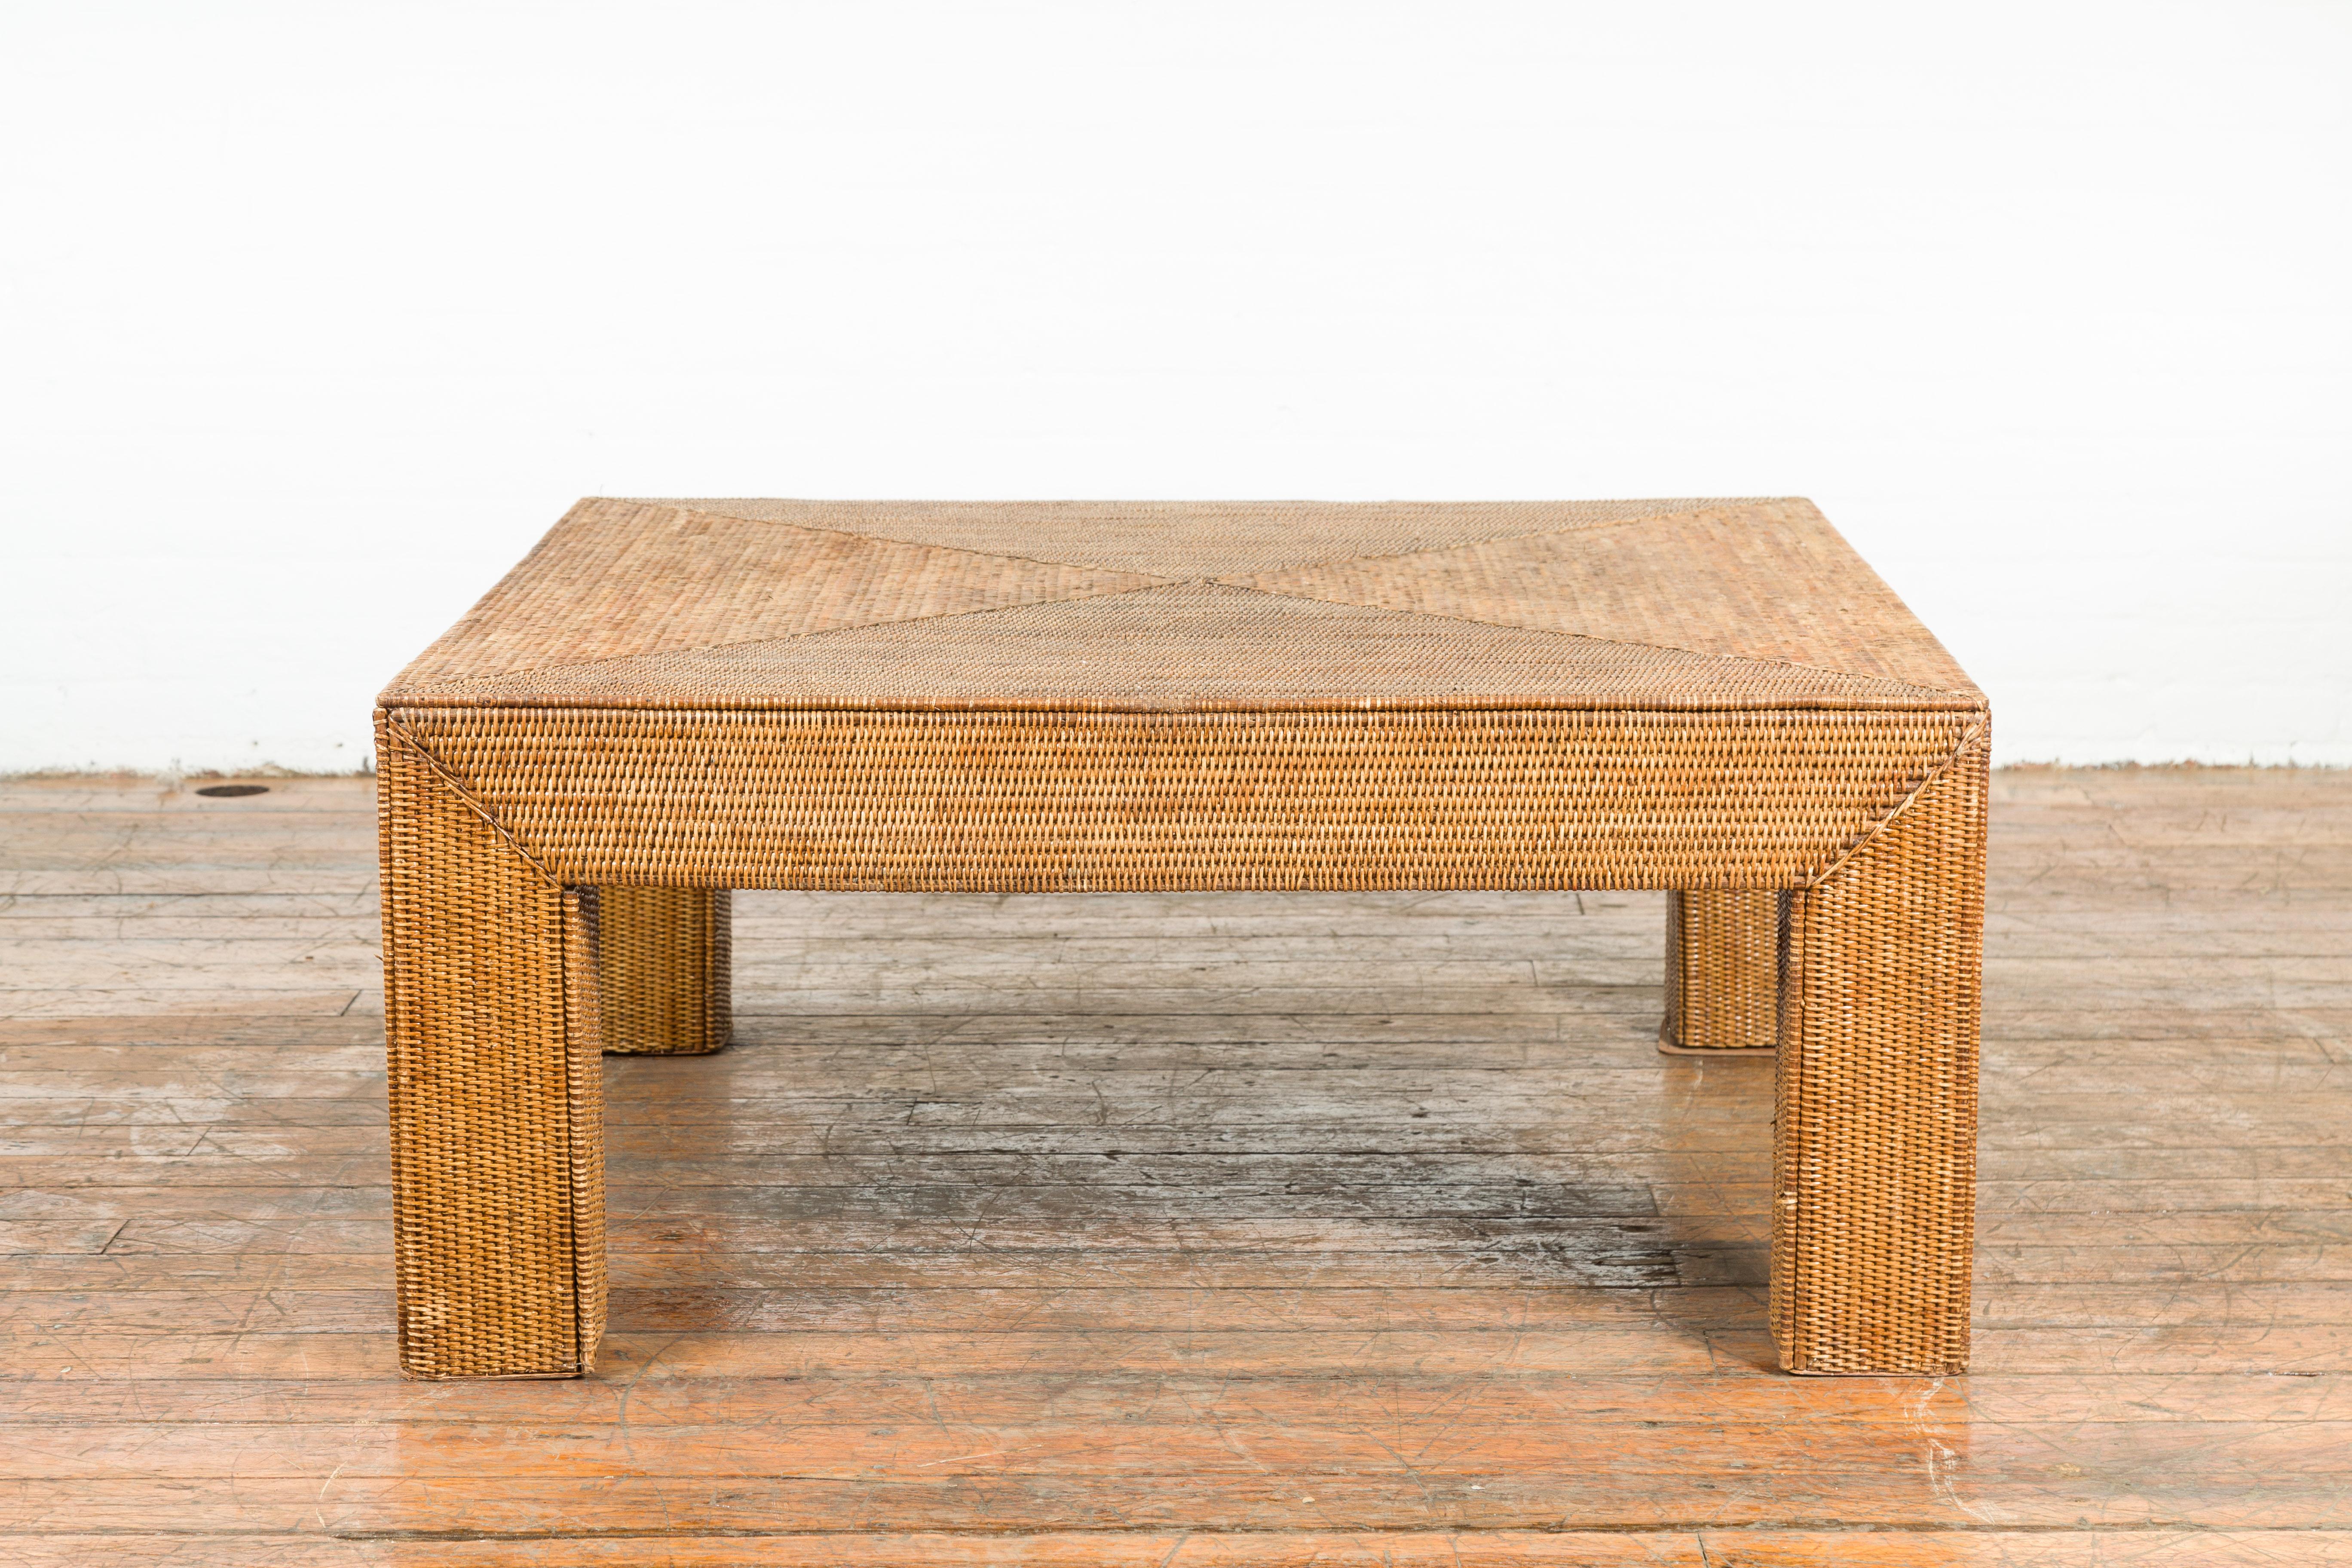 A Burmese vintage rattan parsons leg coffee table from the mid 20th century, hand-stitched over wood. We currently have several available, priced and sold $3,250 each. Created in Burma during the midcentury period, this Parsons leg coffee table